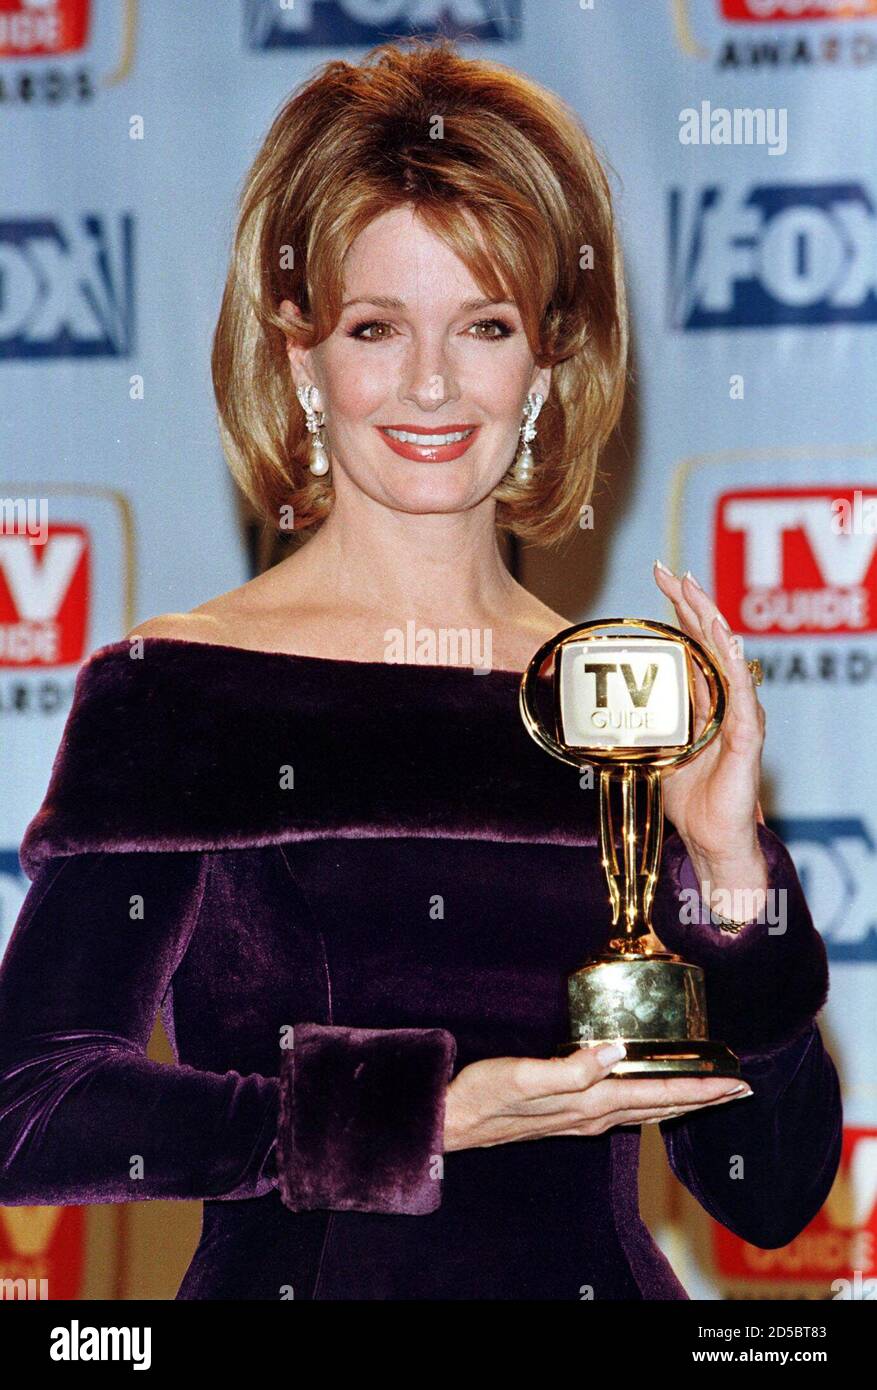 Actress Deidre Hall, one of the cast members of the soap opera ' Days of Our Lives' poses with the TV Guide Award the program won as Favorite Soap Opera at the first annual TV Guide Awards February 1 on the Fox Studio lot in Los Angeles. The awards were determined by readers of TV Guide magazine who voted for their favorite television shows and stars and were telecast live on the FOX TV network. Stock Photo